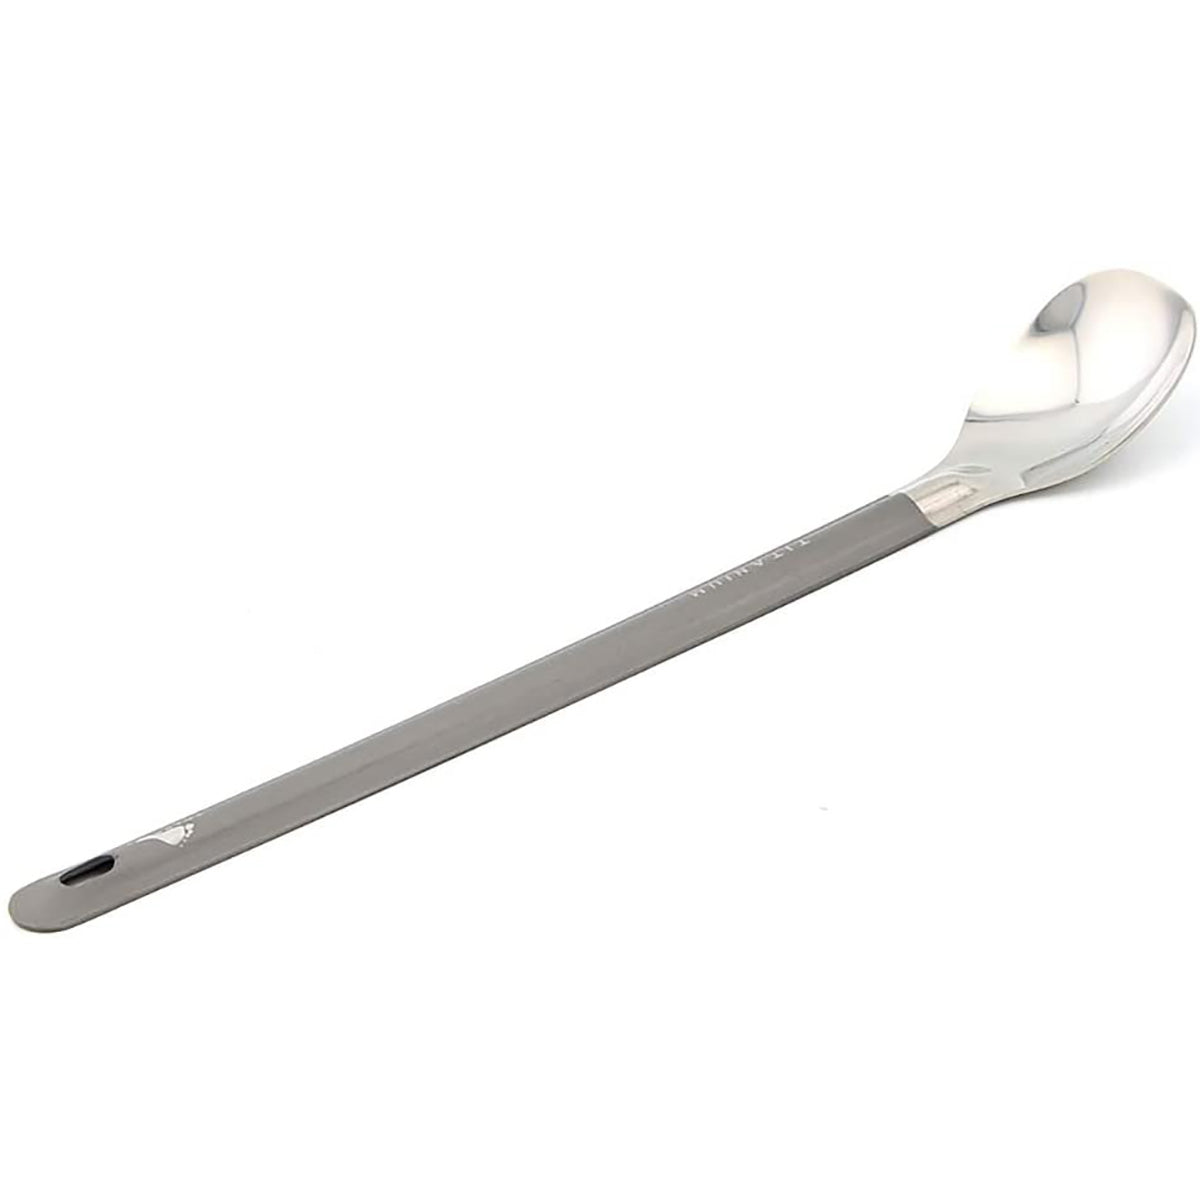 TOAKS Ultralight Long Handled Titanium Camping Spoon with Polished Head TOAKS